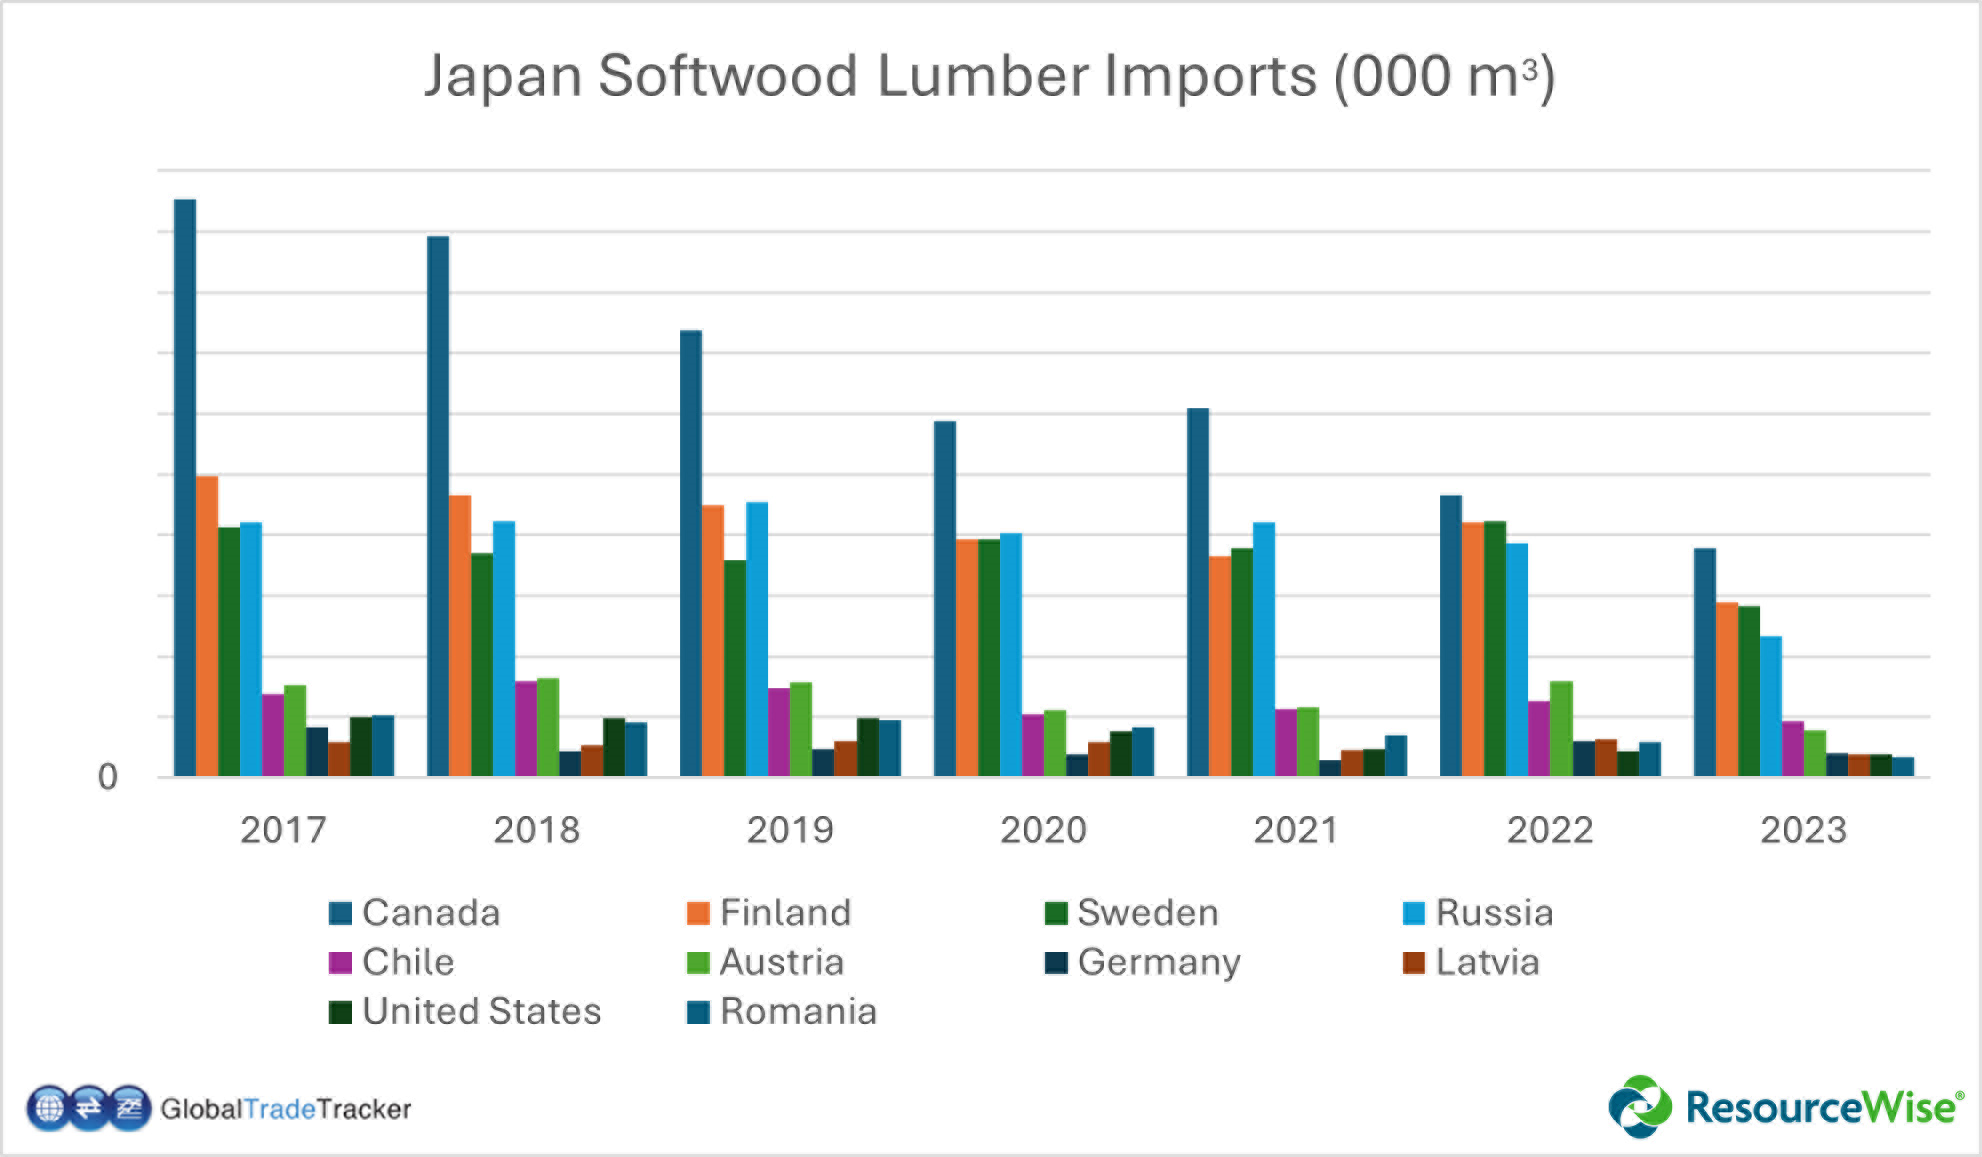 A Look at Japan's Declining Softwood Lumber Imports